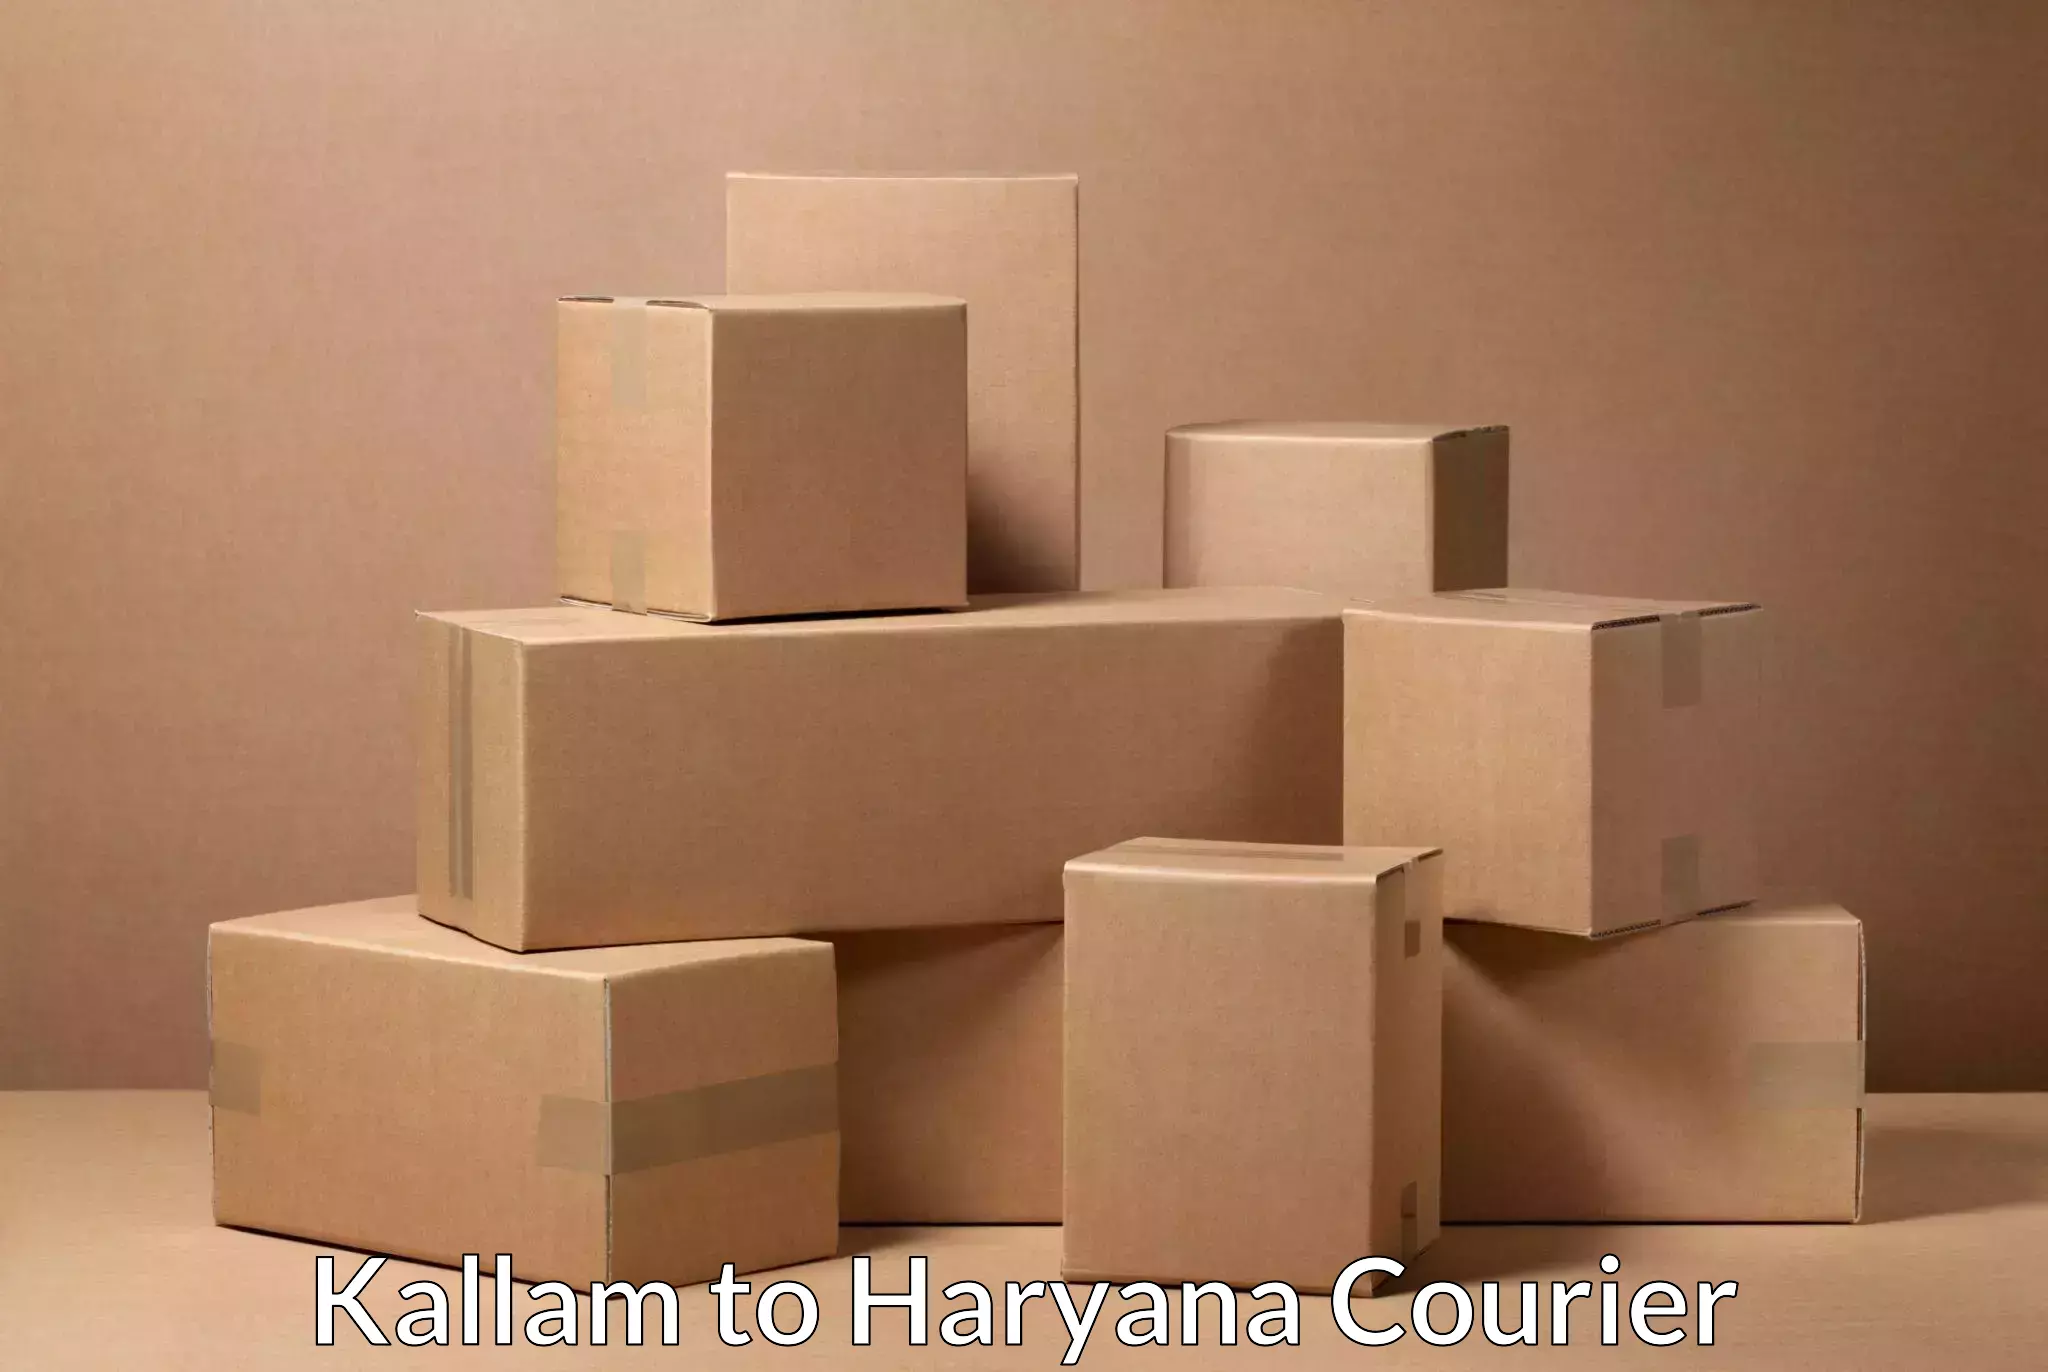 Subscription-based courier Kallam to Haryana